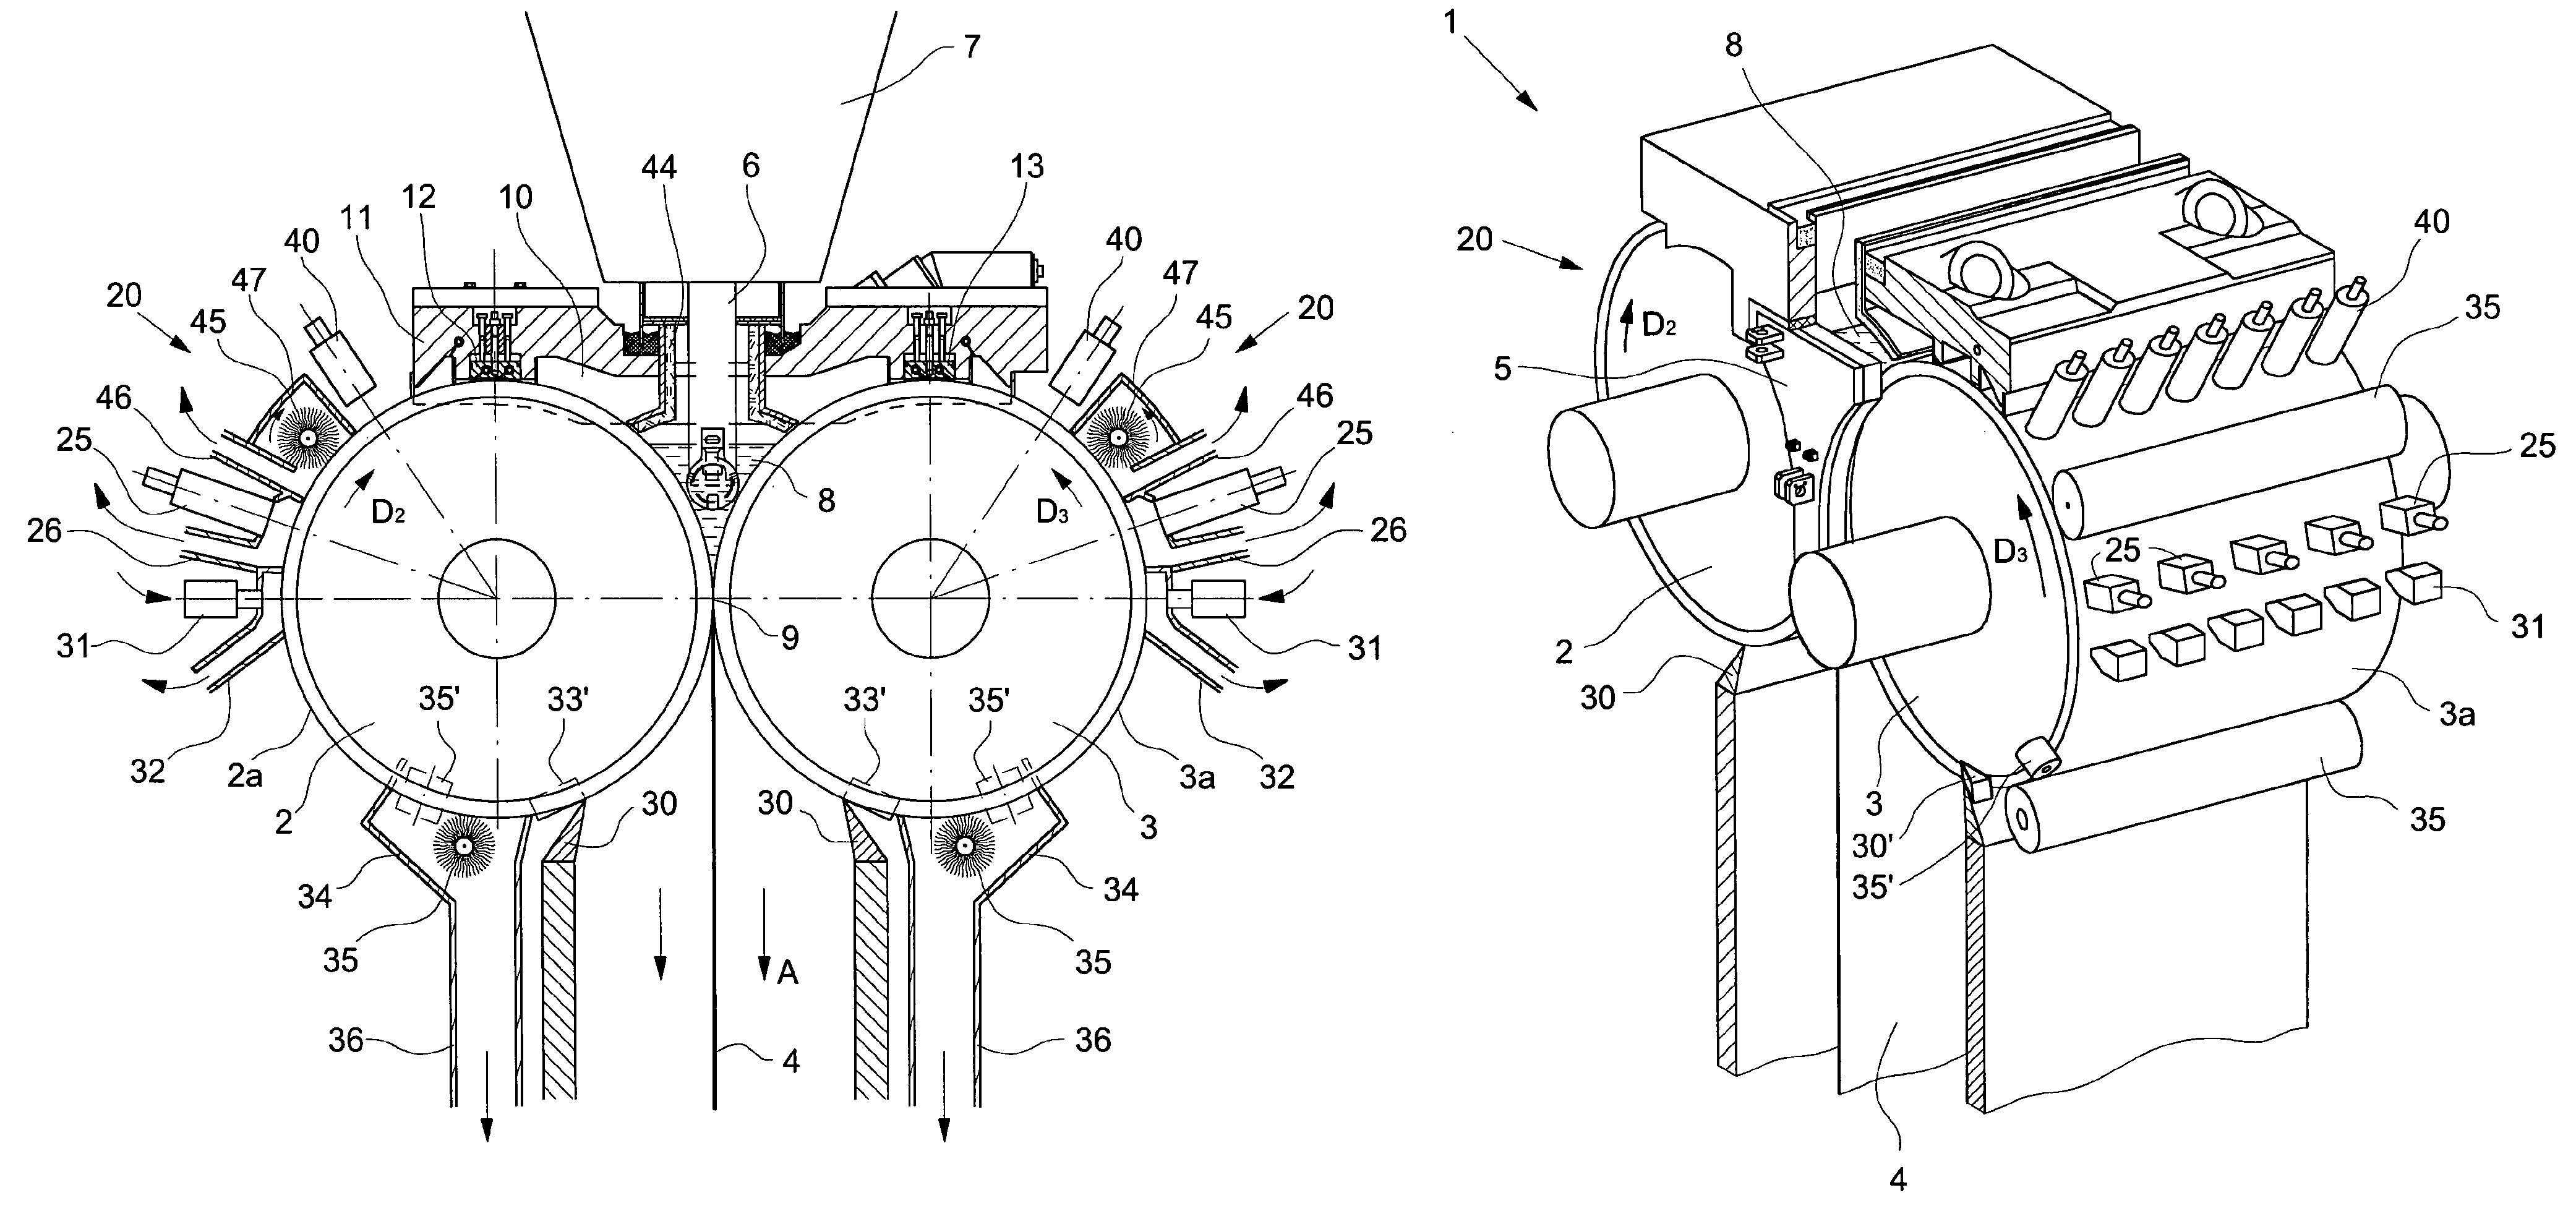 Apparatus for the continuous surface cleaning of rotationally movable casting rolls of a strip-casting machine